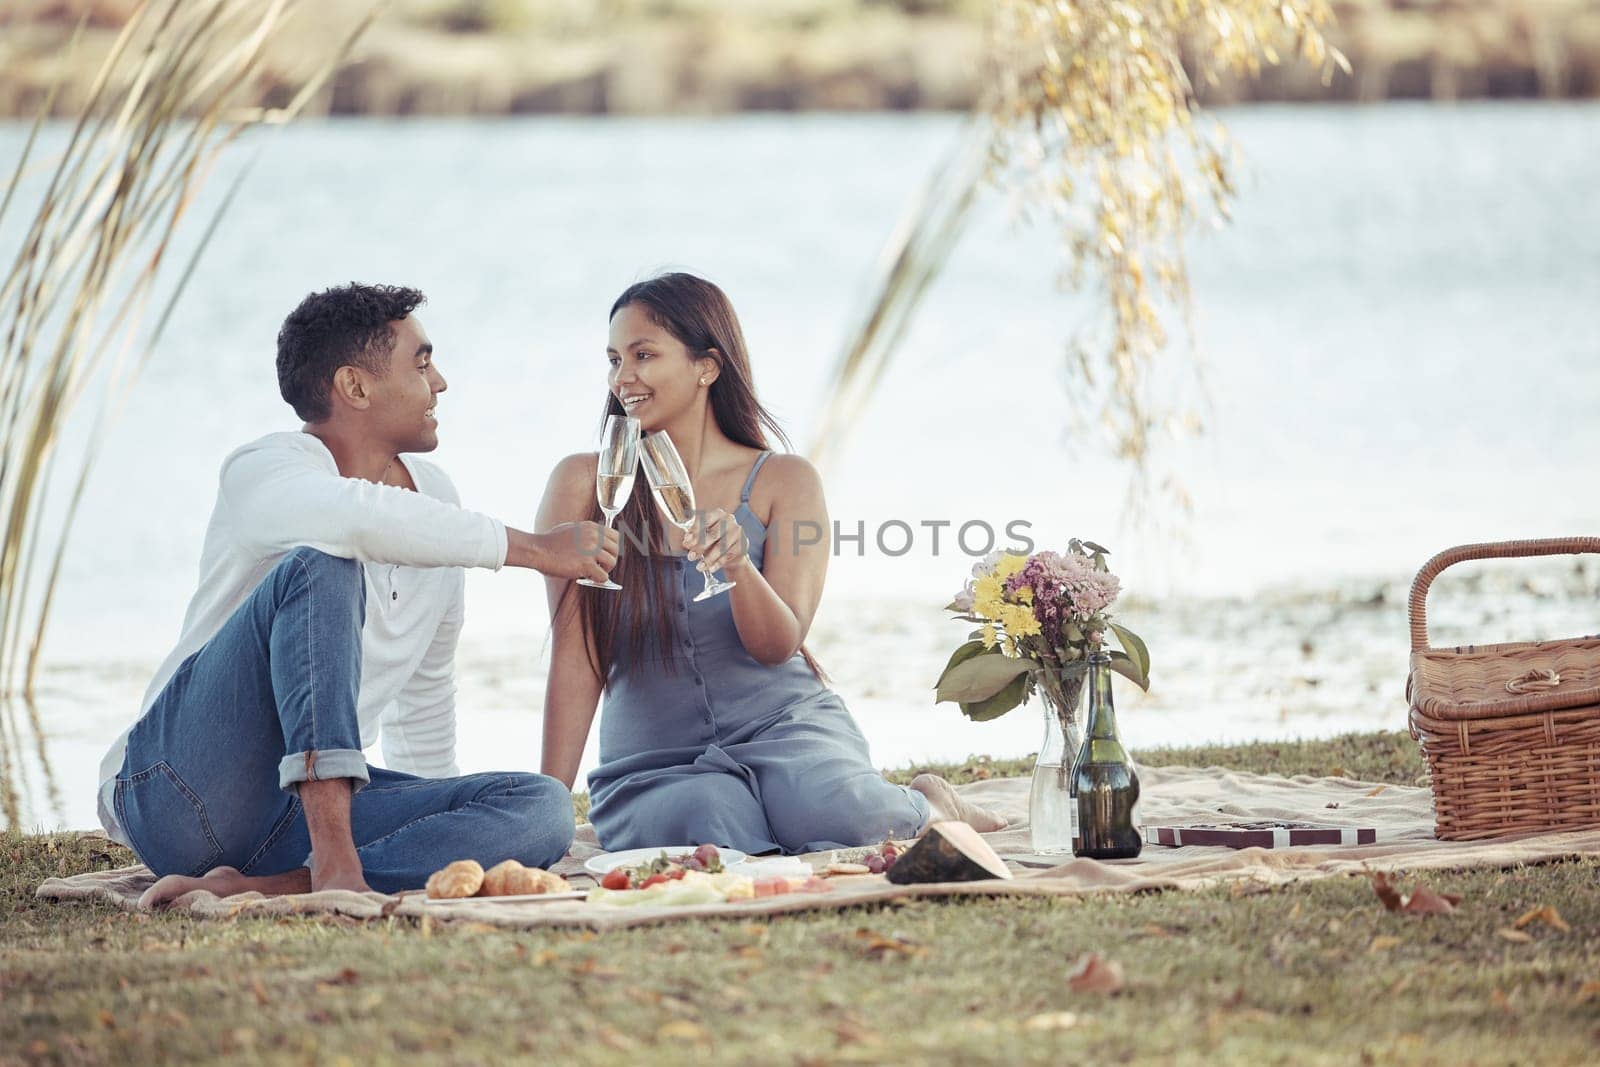 Man, woman and date with picnic, wine and romance for love or relationship anniversary. Couple, nature and lake with alcohol, happiness and summer passion with bouquet and flowers for celebration.